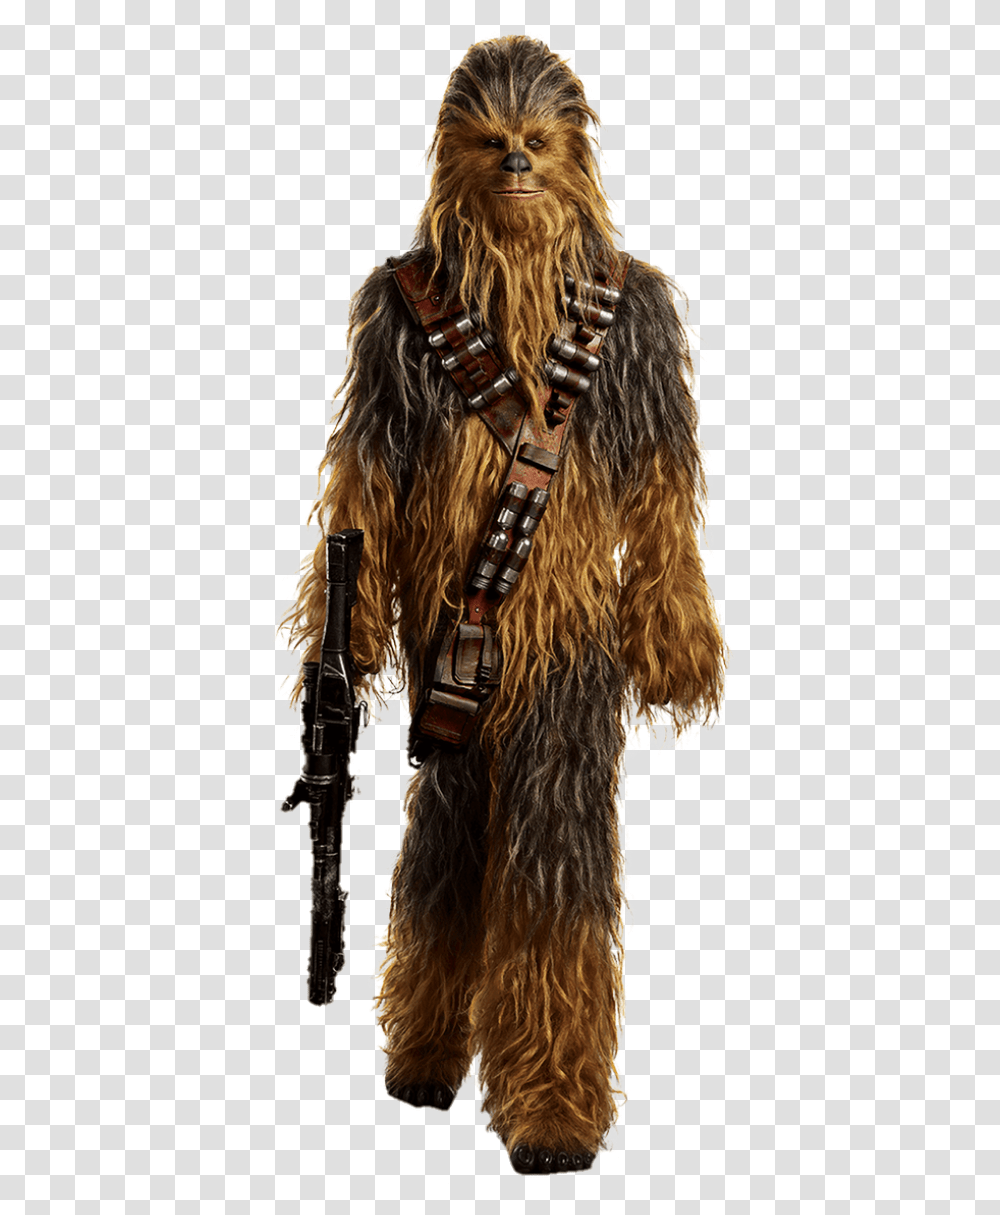 Solo A Star Wars Story Chewbacca By Metropolis Hero1125 Chewbacca Solo A Star Wars Story, Person, Harness, Hair, Accessories Transparent Png